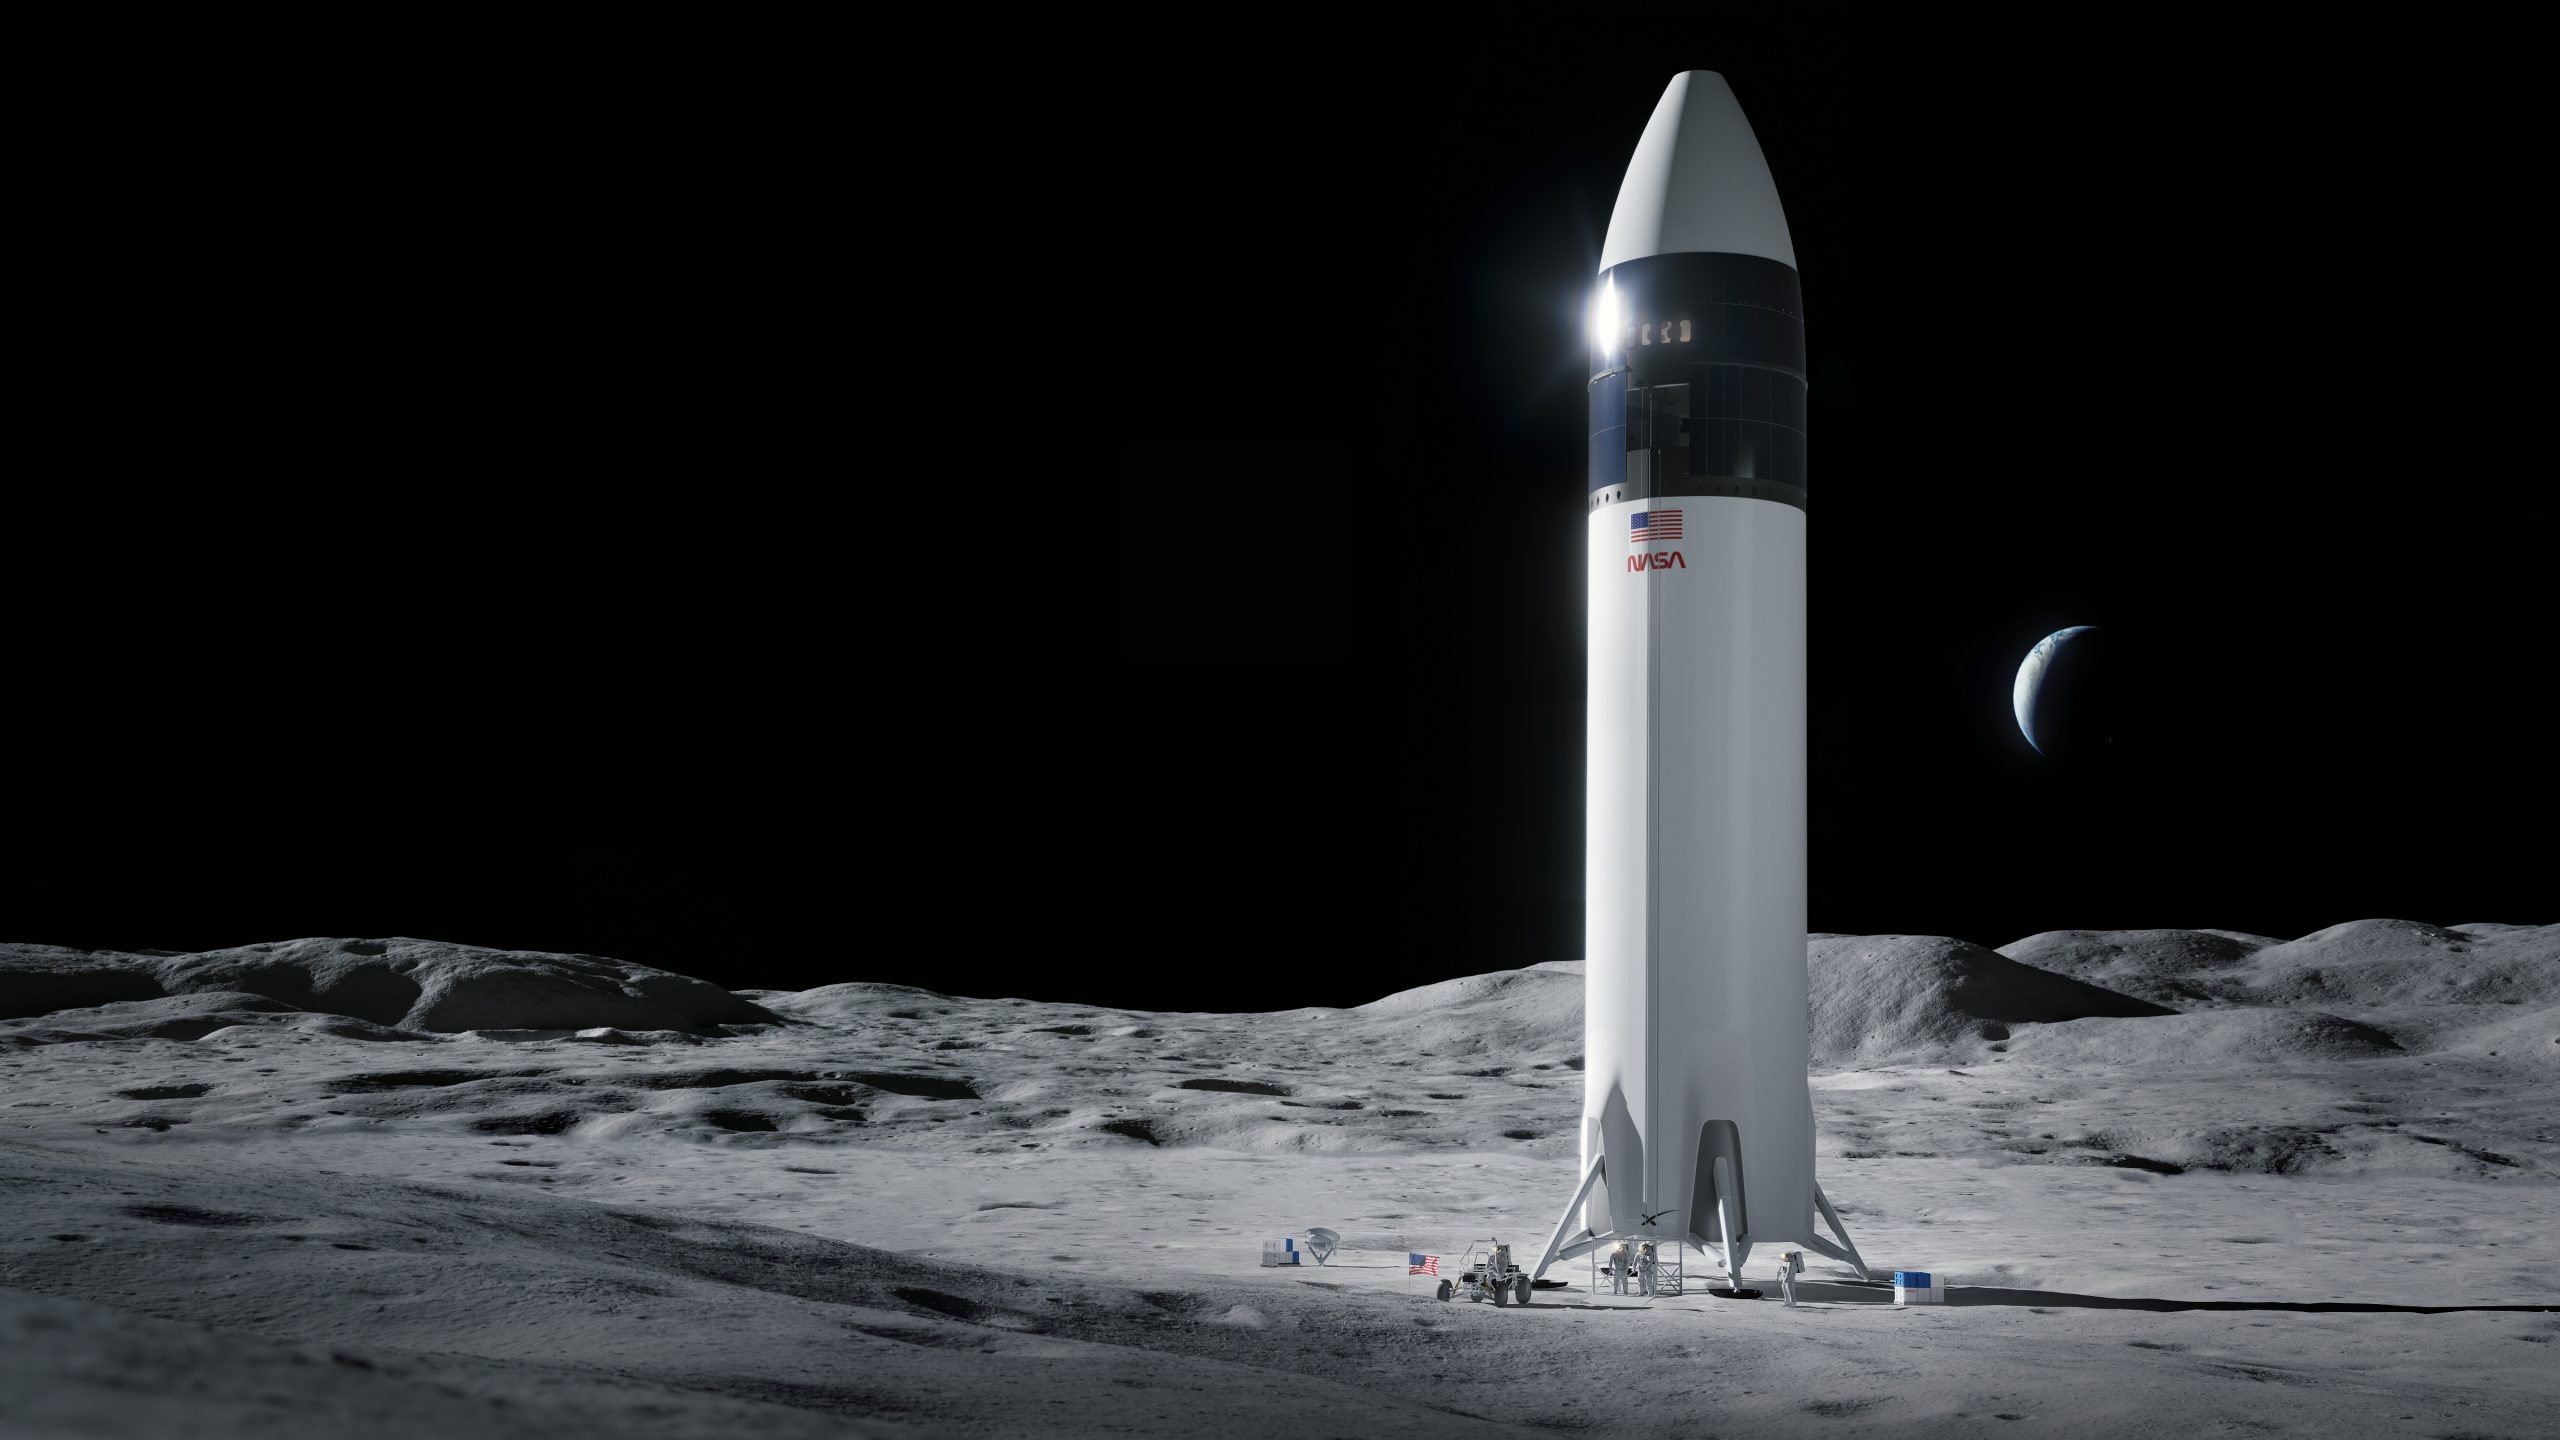 Artist's impression of a SpaceX Starship on the lunar surface. Credit: SpaceX